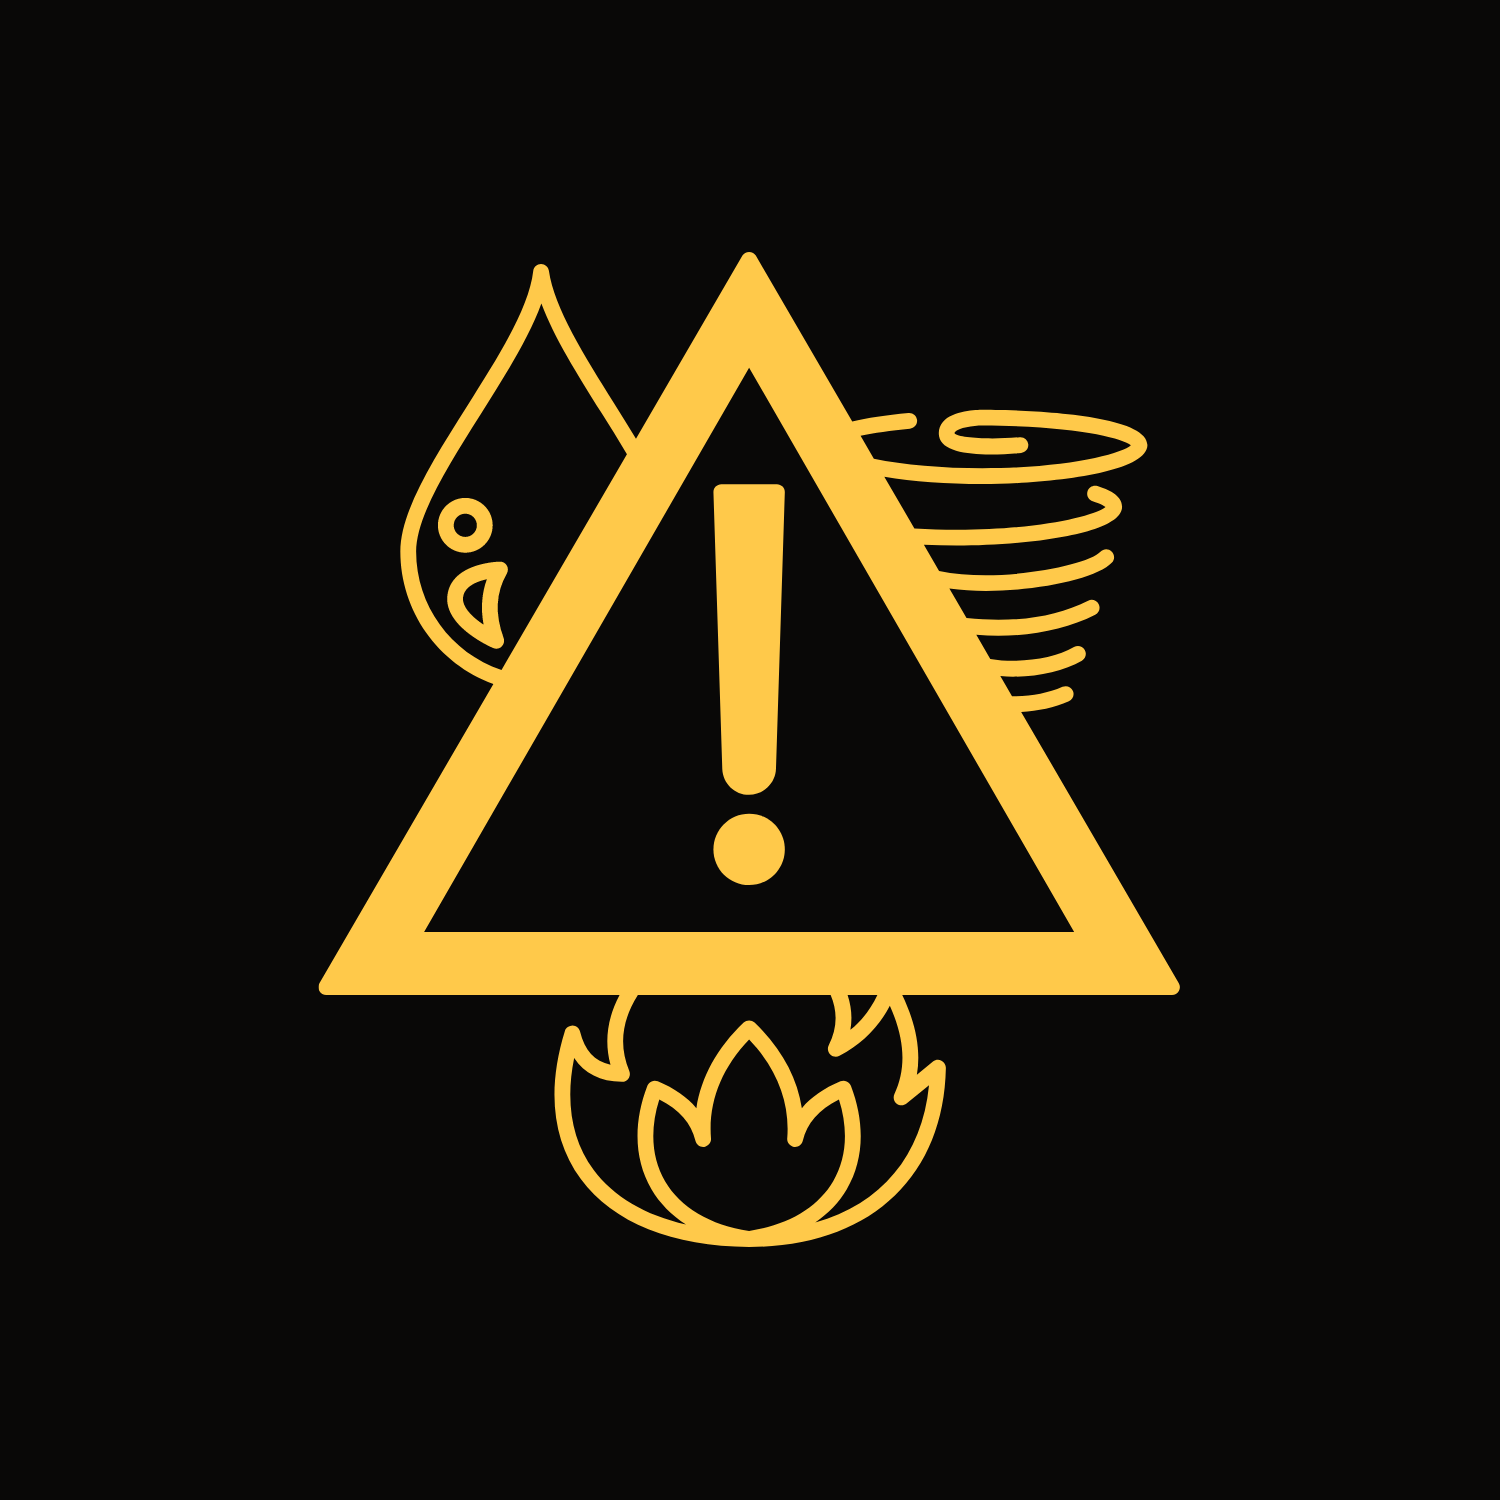 icon of the disaster symbol with symbols for Flood, Fire, and Tornado